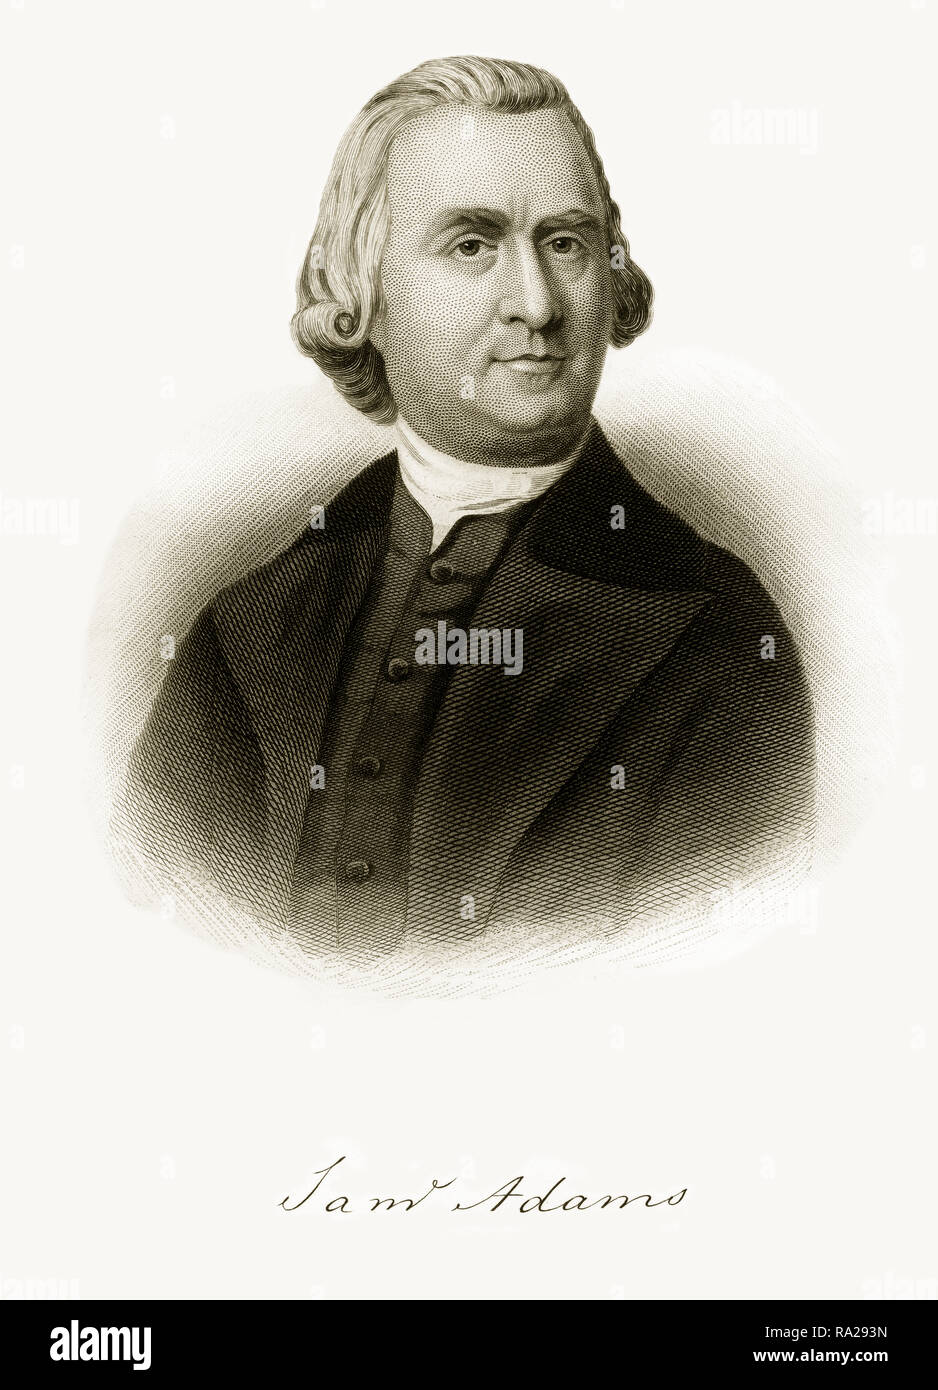 Very rare, beautifully detailed full length engraved portrait of Samuel Adams Historical Engraving, Published in 1872. Image also includes signature. Stock Photo